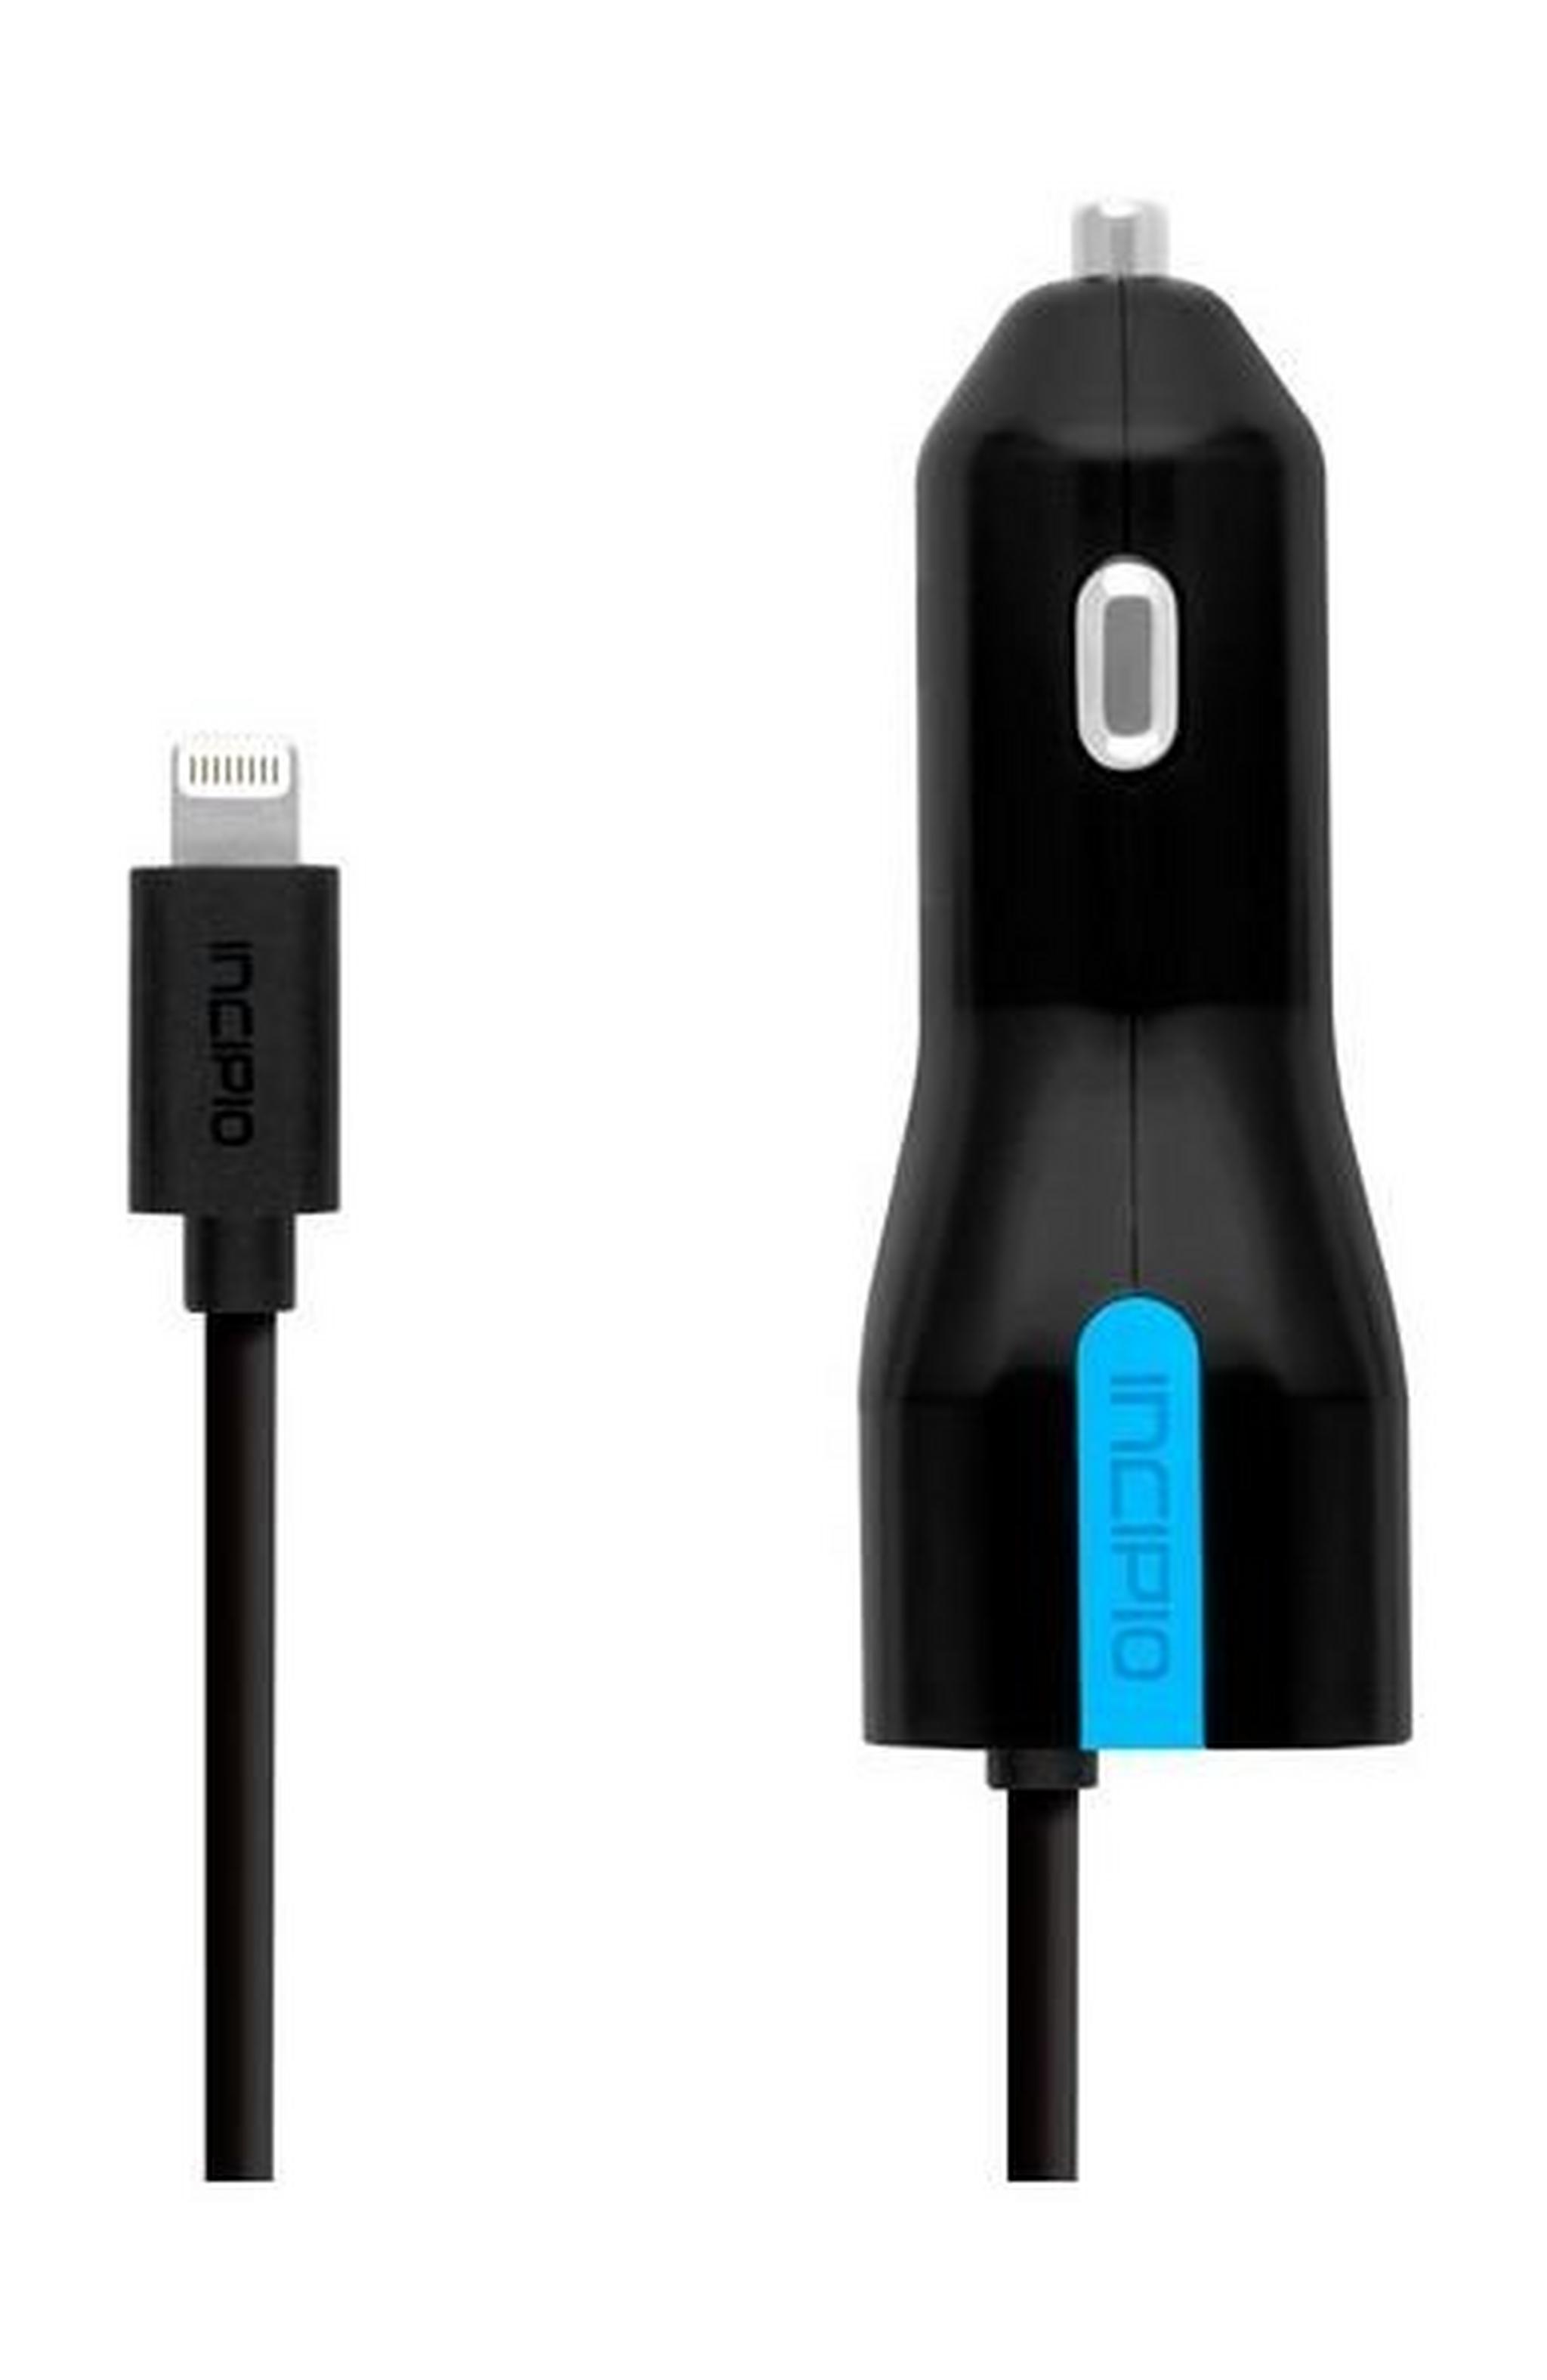 Incipio USB and Lightning 4.8 Amp Car Charger for Smartphones (ICP-PW171) - Black